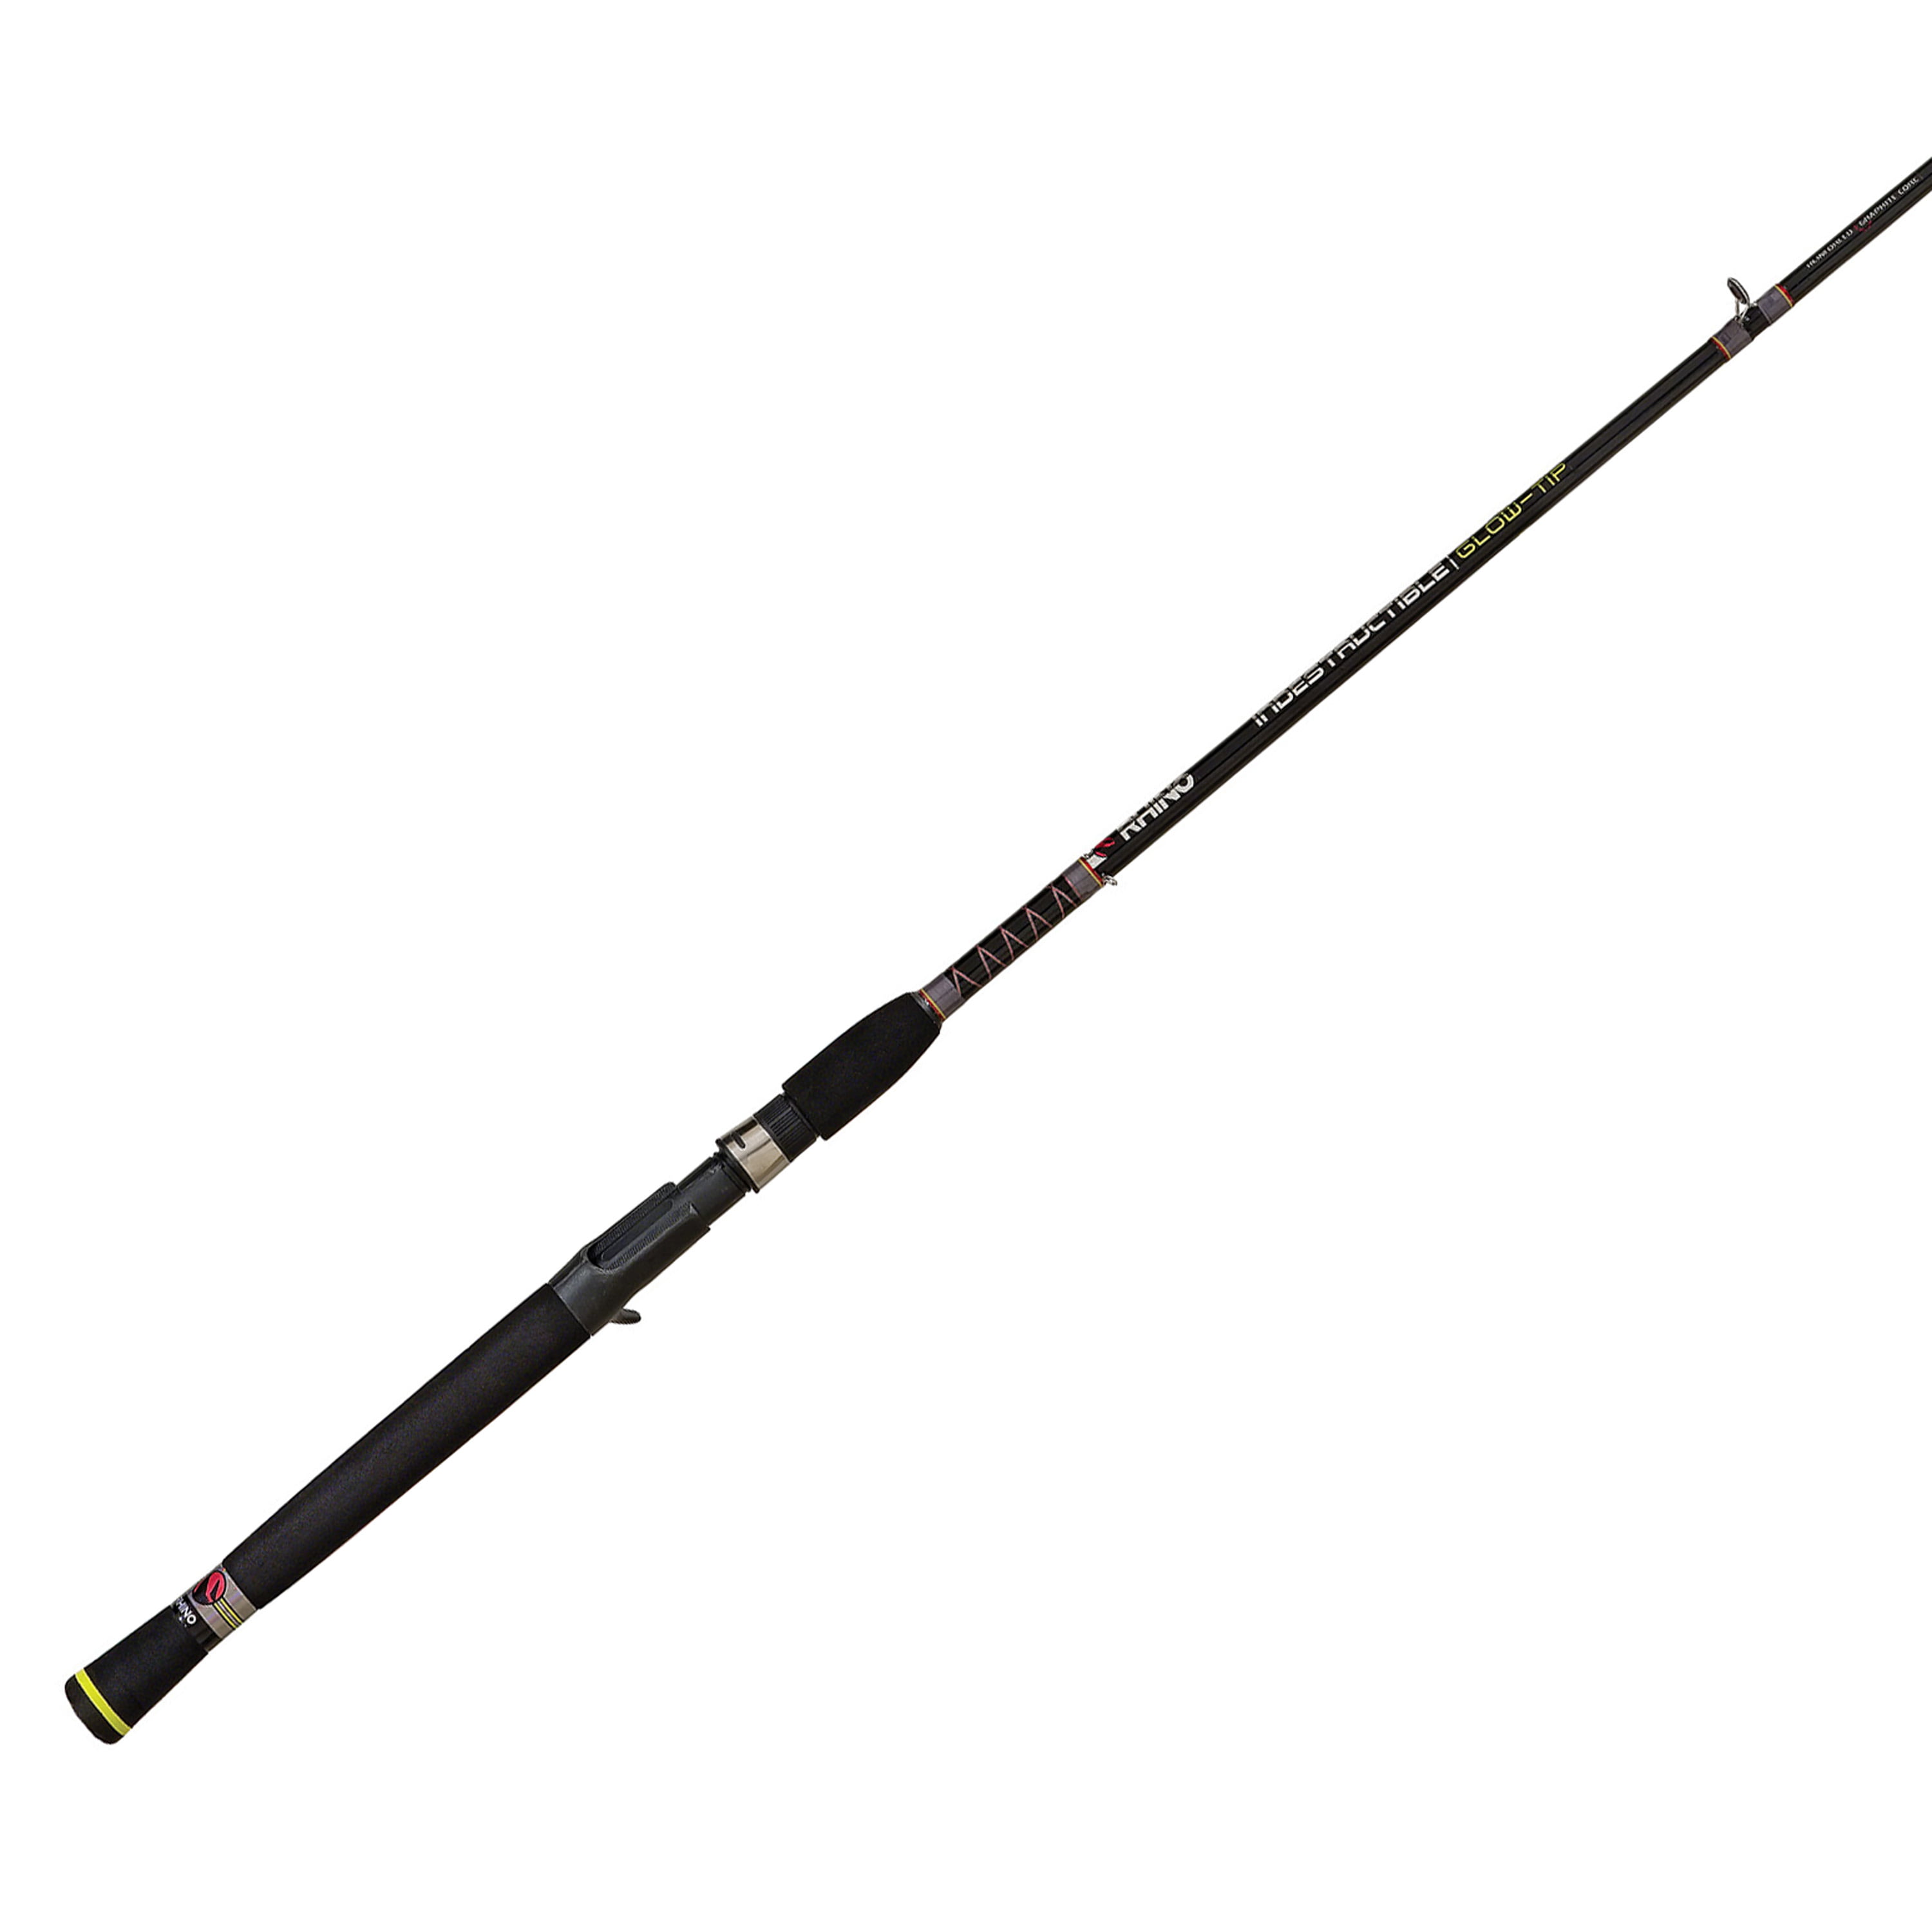  Zebco Rhino Tough Casting Fishing Rod, 5-Foot 6-Inch 1-Piece  Heavy-Duty Cross-Weave Fishing Pole, Comfortable EVA Rod Handle, Heavy-Duty  Guides, Stainless Steel D-Frame Tip Guide, Medium Power, Black : Everything  Else